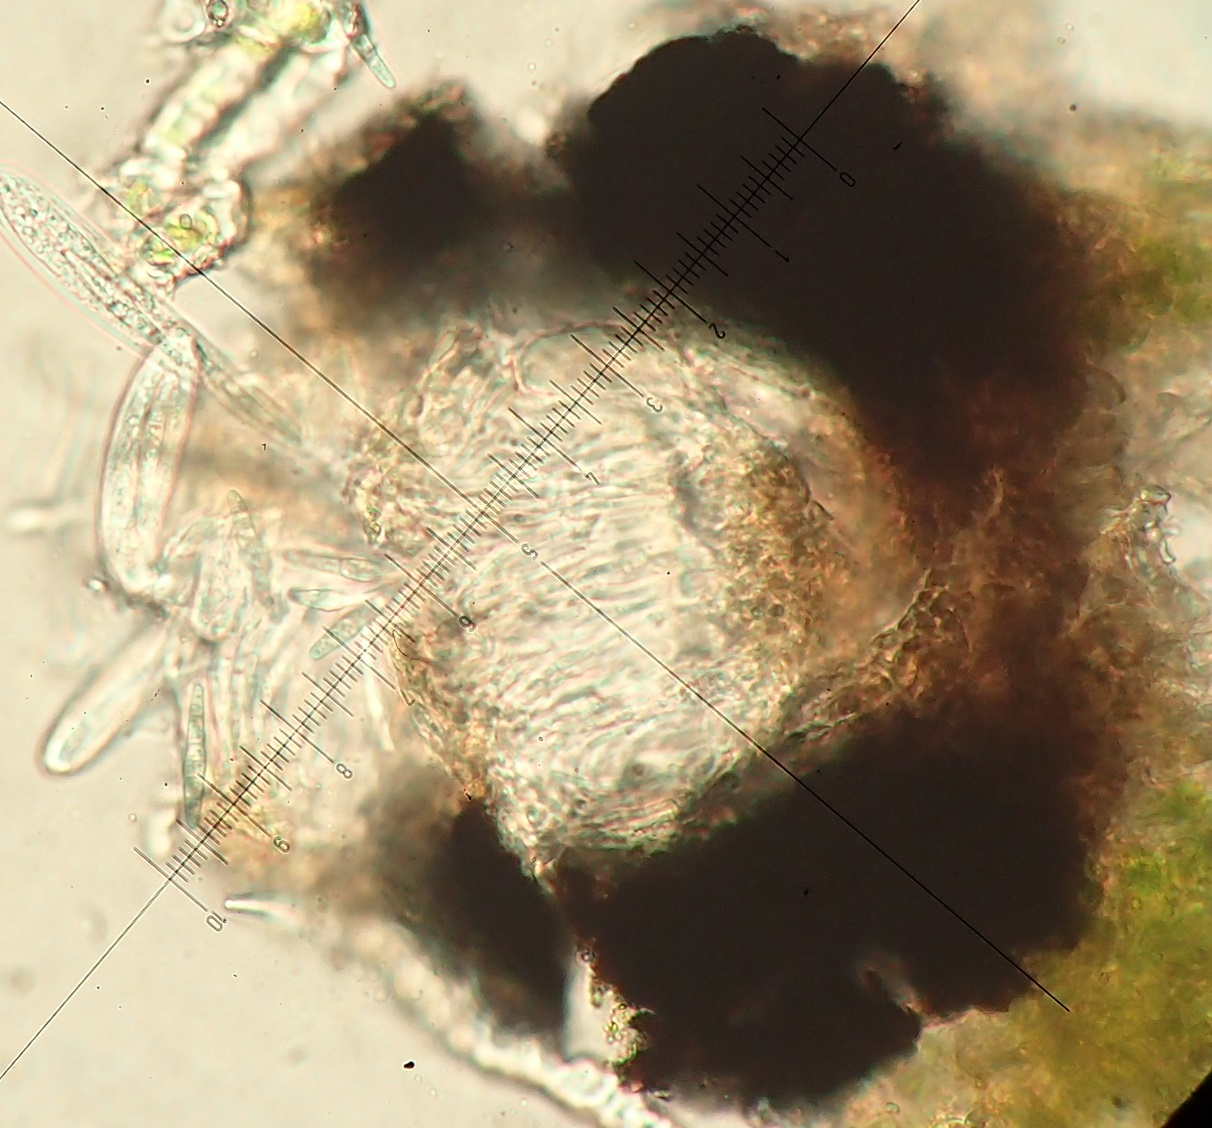 Opegrapha niveoatra lirella section with 5-7-septate thin spores in asci